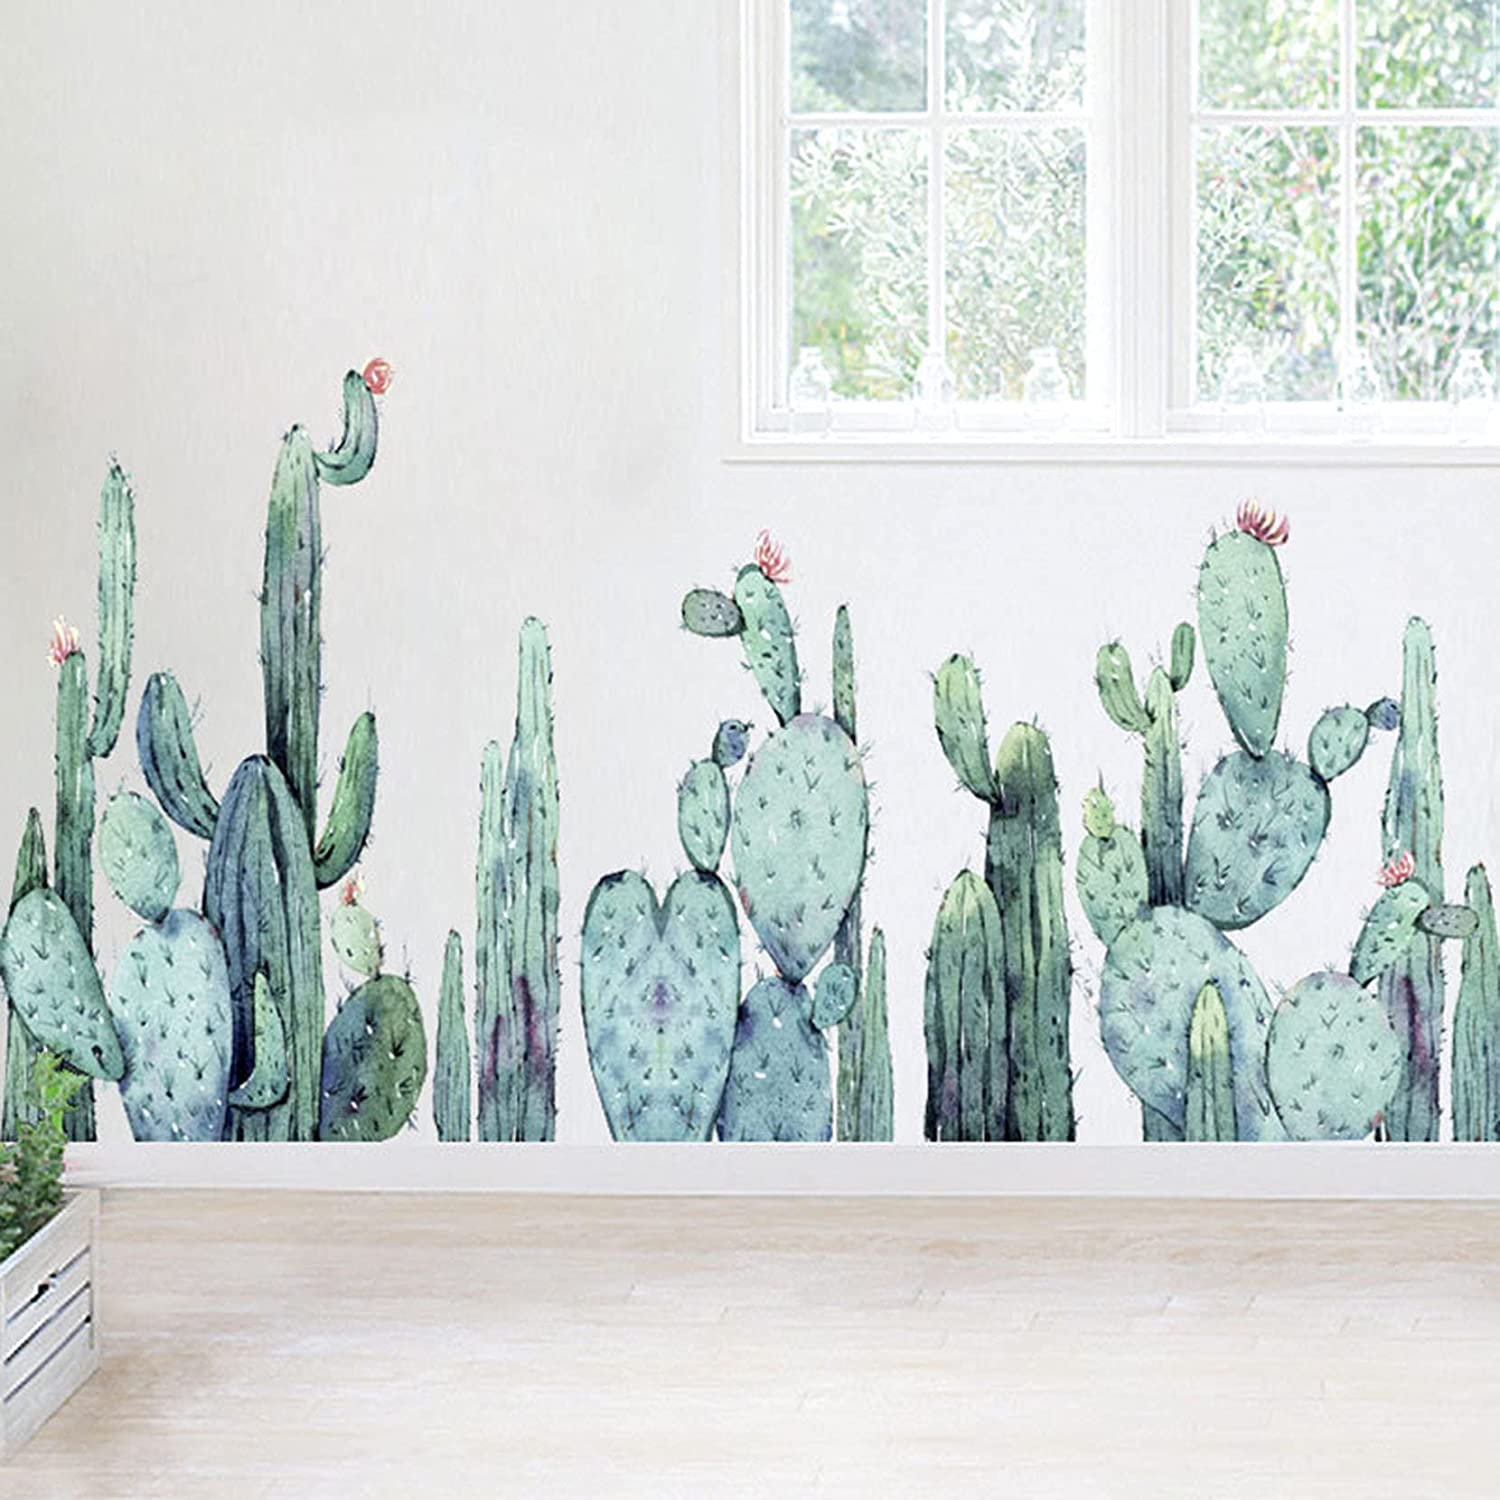 Cactus Wall Decals, Green Plant Cacti Stickers for Mirror Wall Decor, Removable Vinyl Peel and Stick Art Murals for Living Room Nursery Bedroom Children Kids Rooms Decor, Art Murals Home Decoration